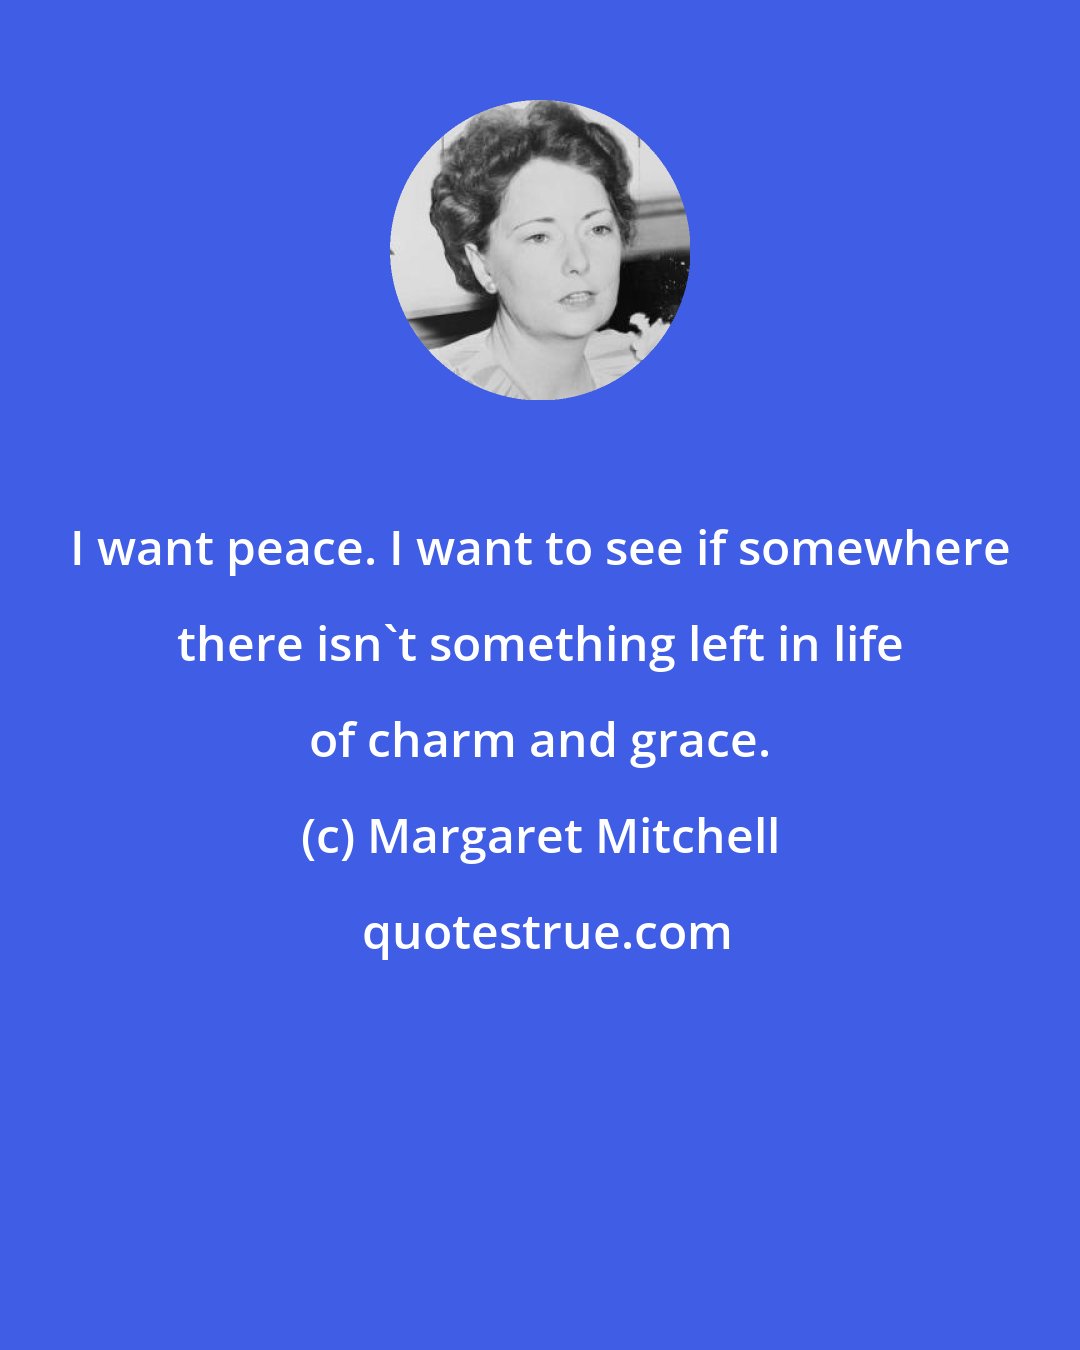 Margaret Mitchell: I want peace. I want to see if somewhere there isn't something left in life of charm and grace.